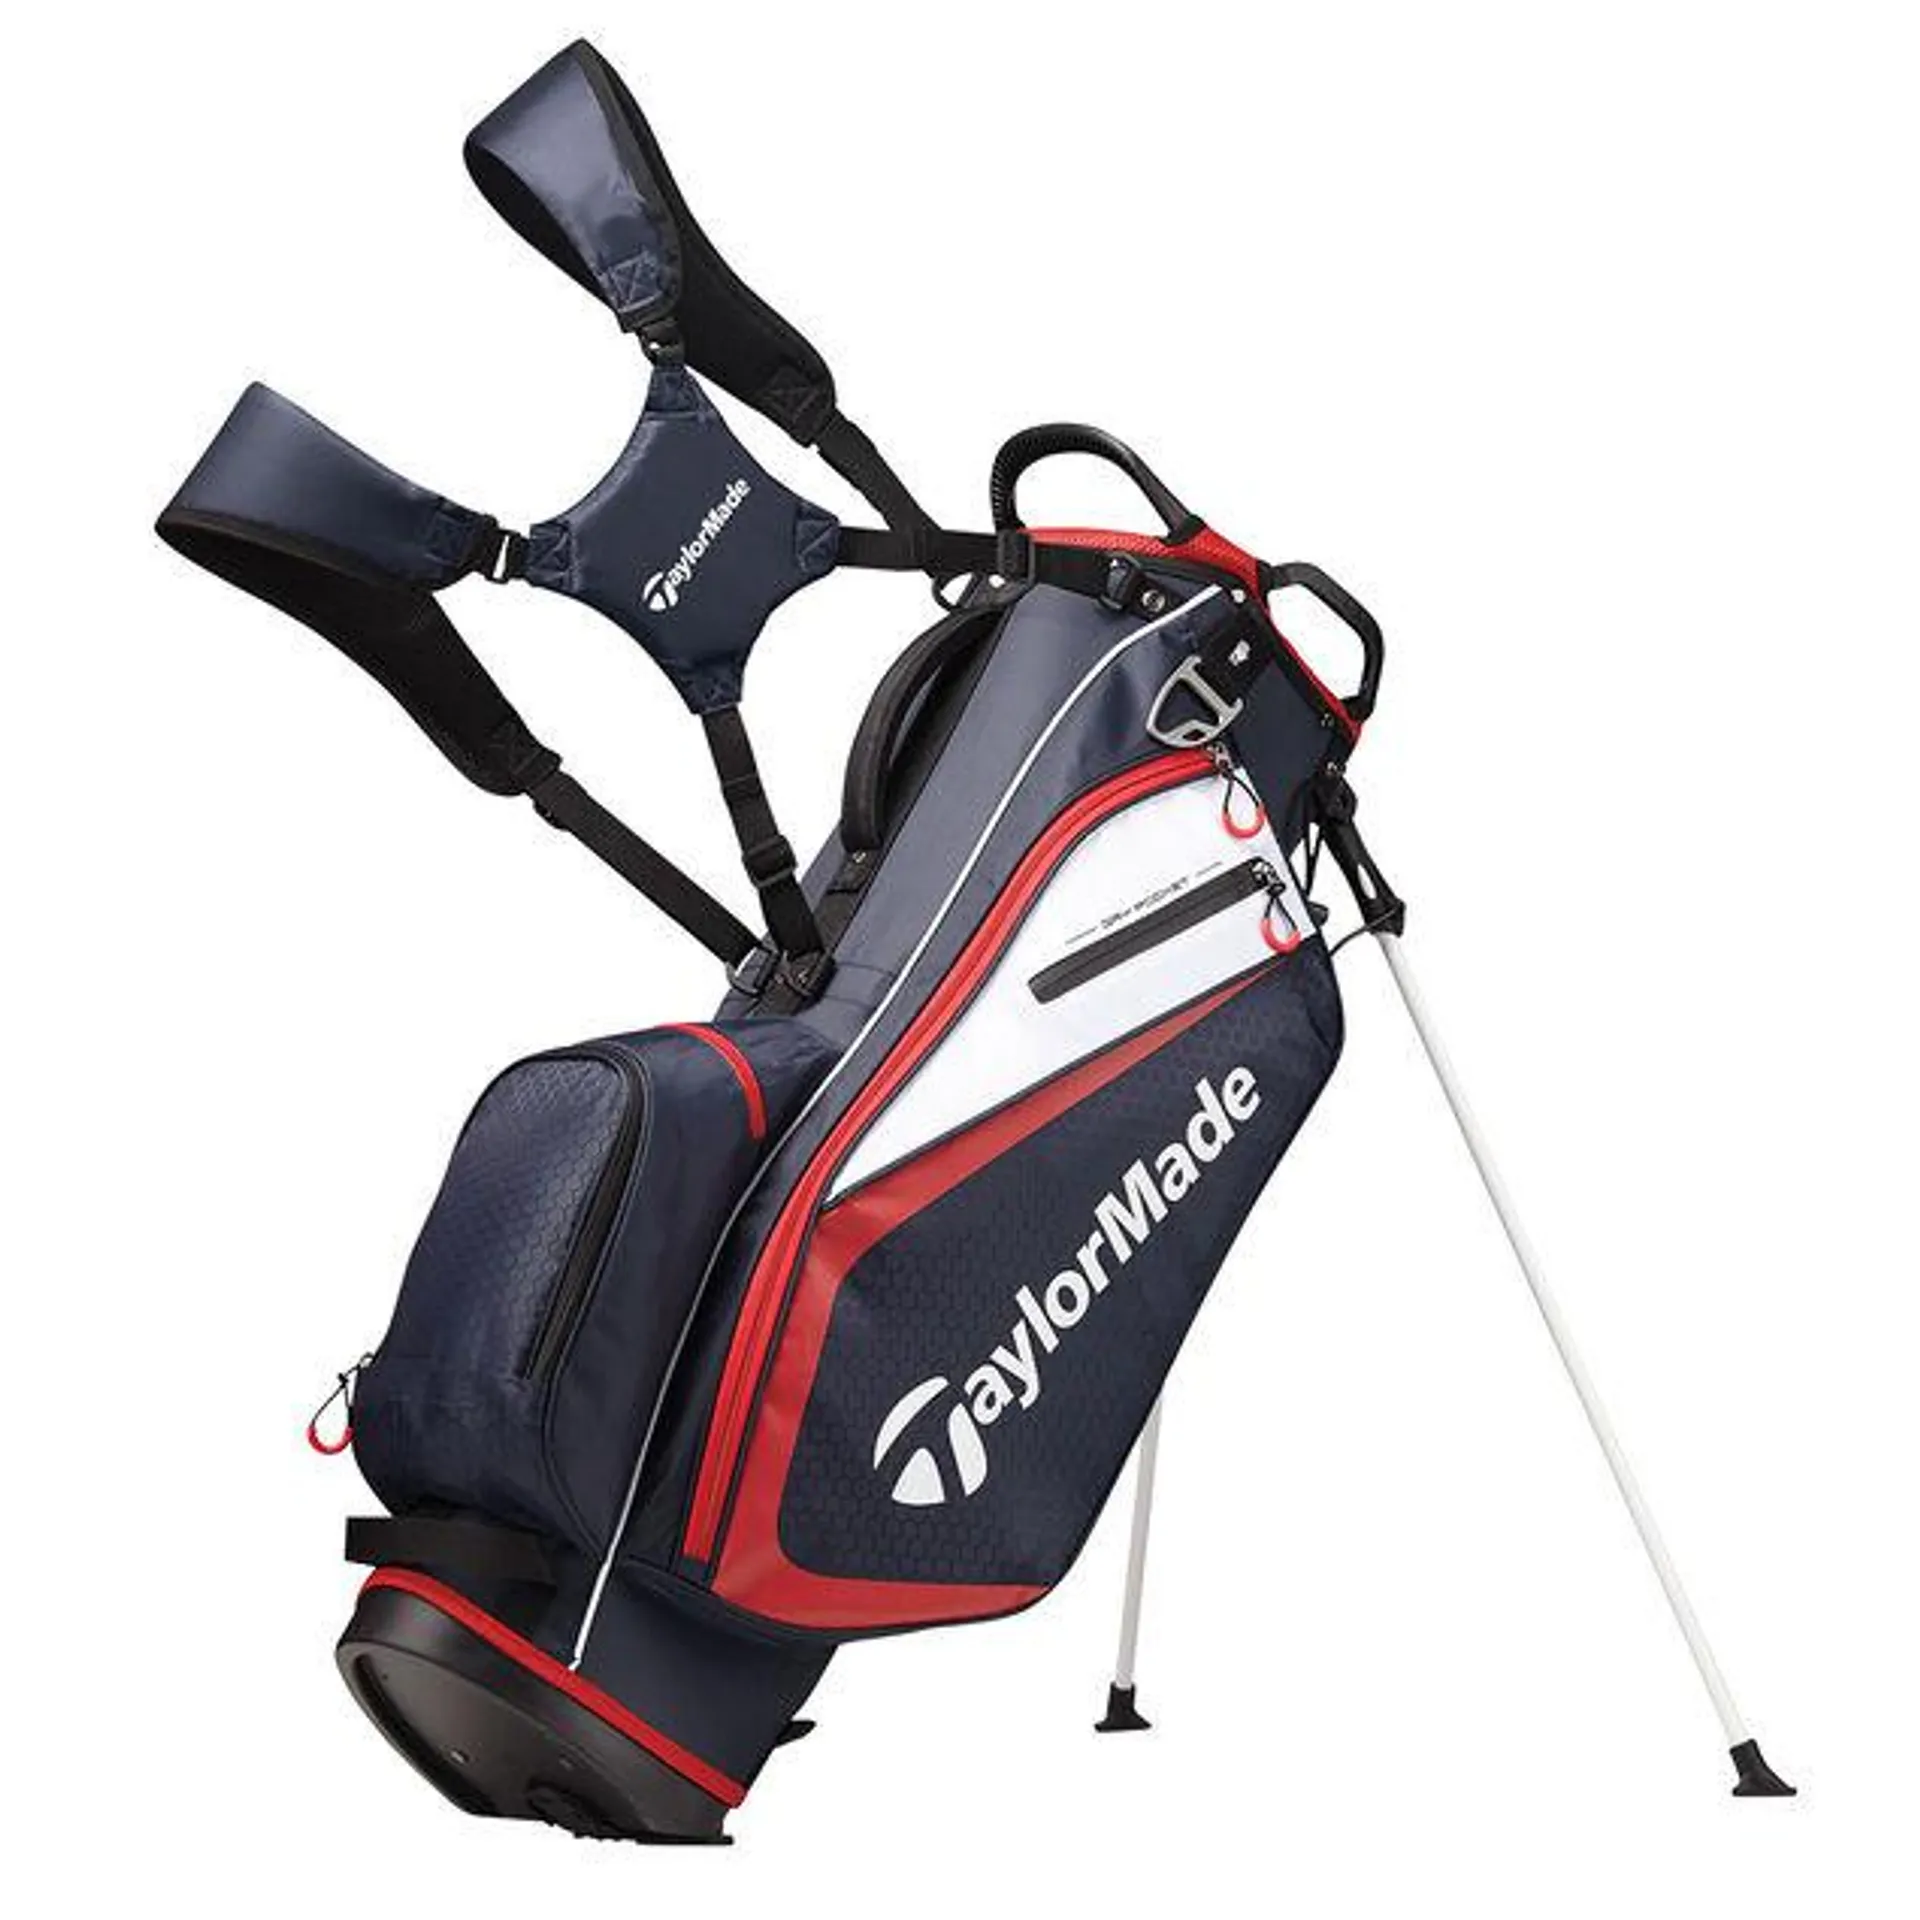 TaylorMade Select Plus Golf Stand Bag